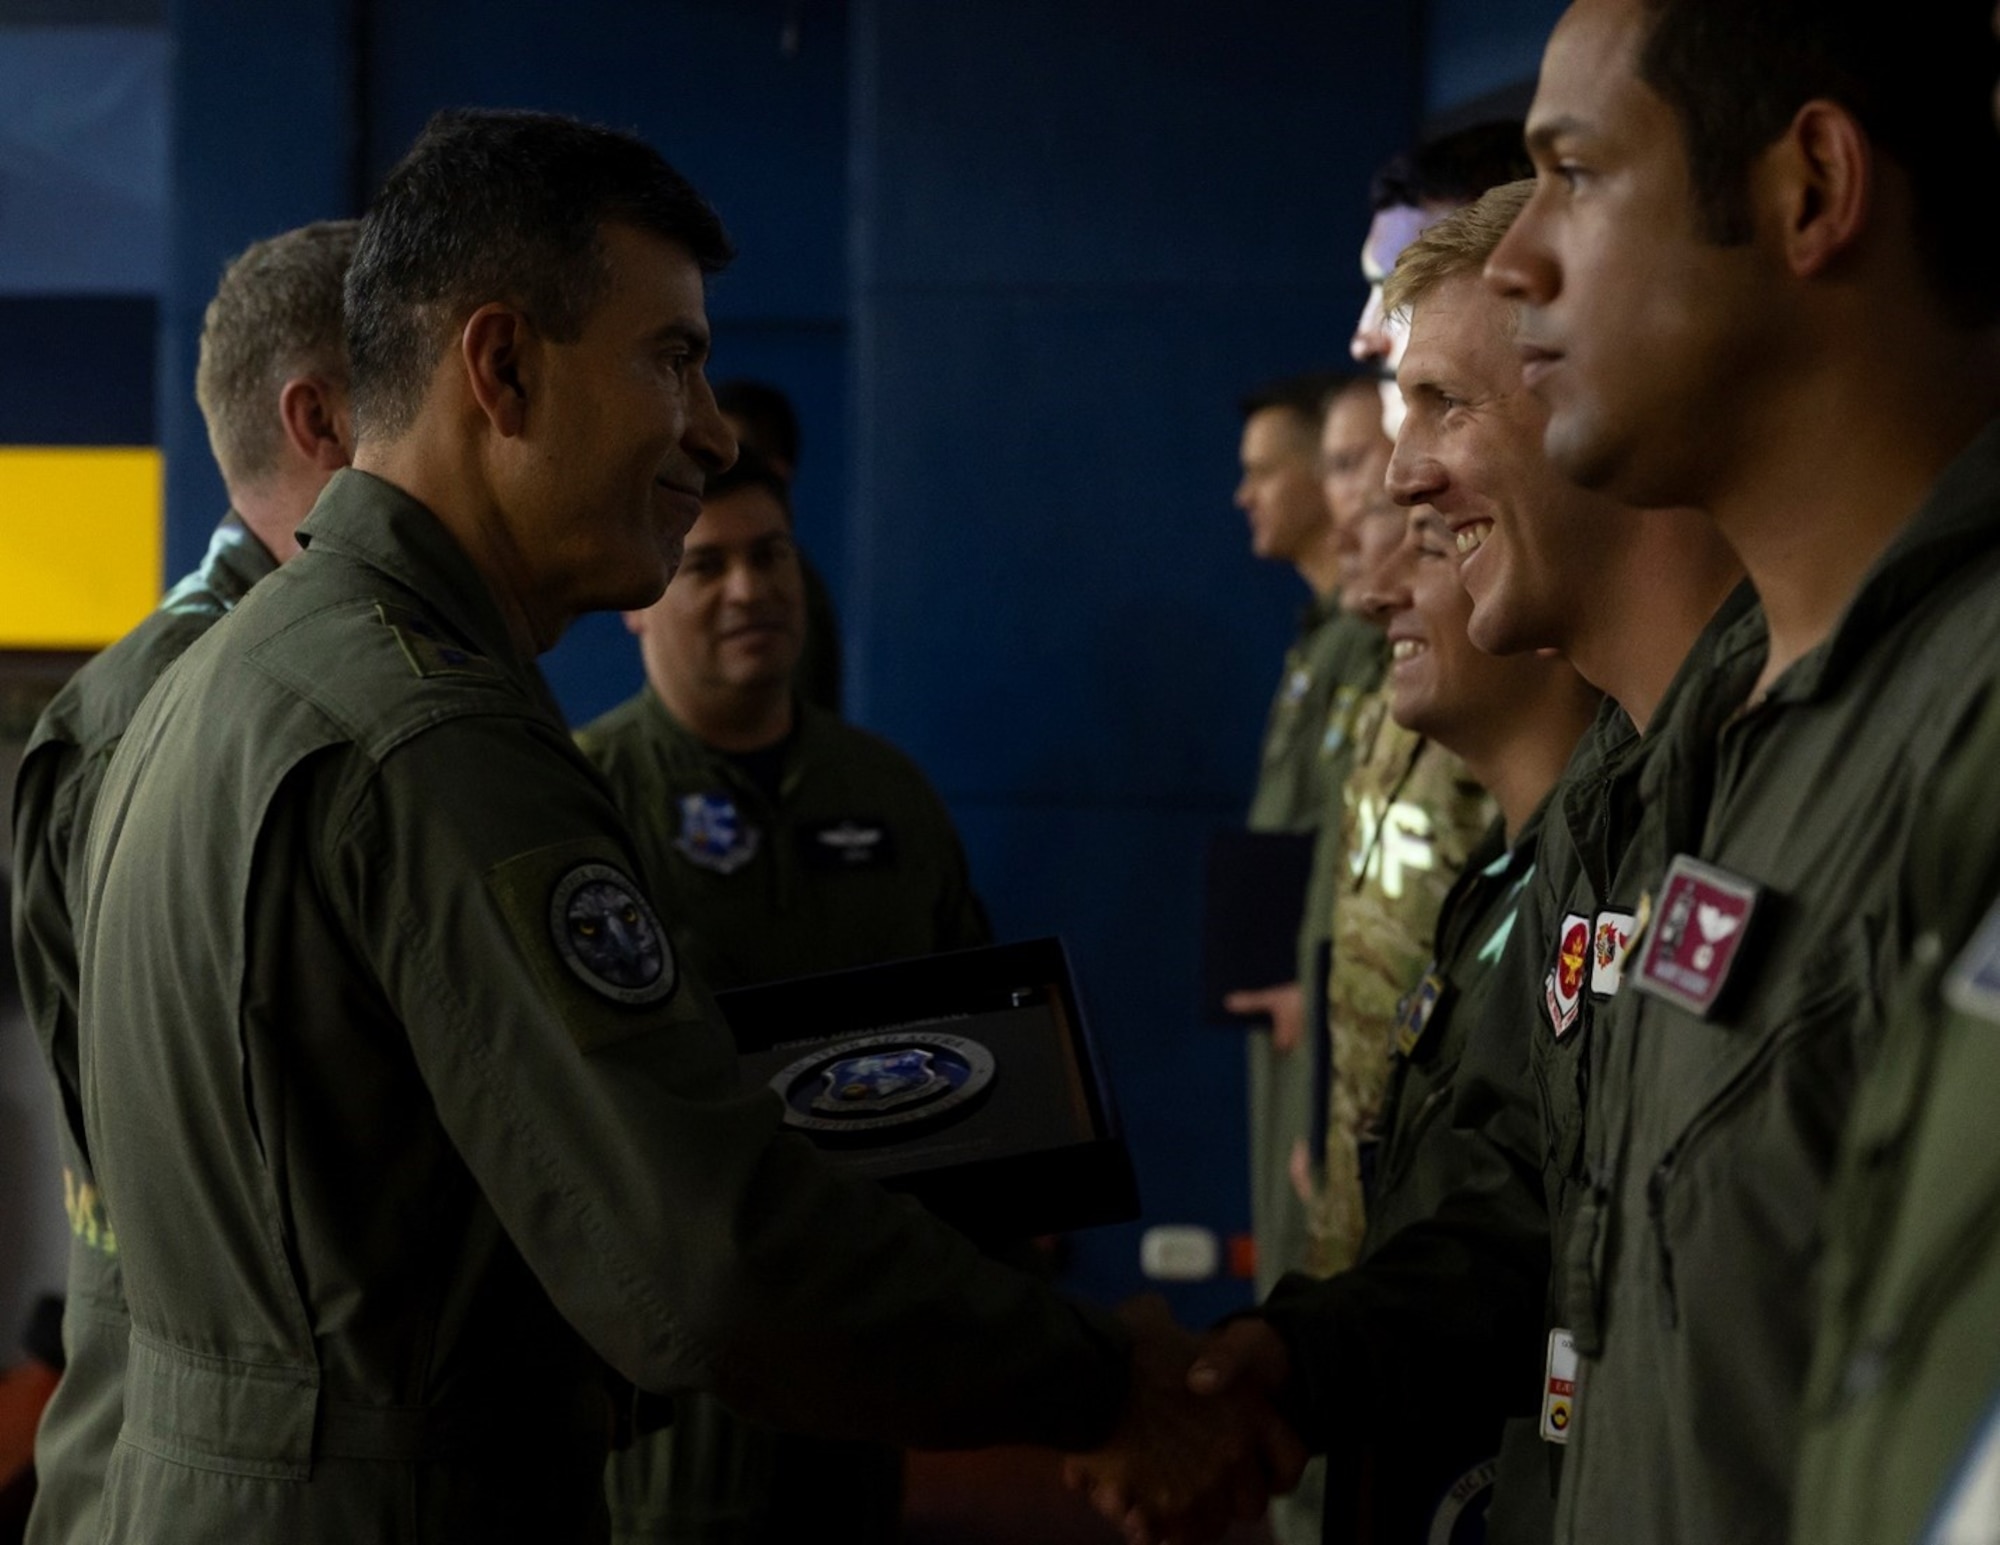 Colombian Air Force officers and United States Air Force Airmen standing across from each other in lines